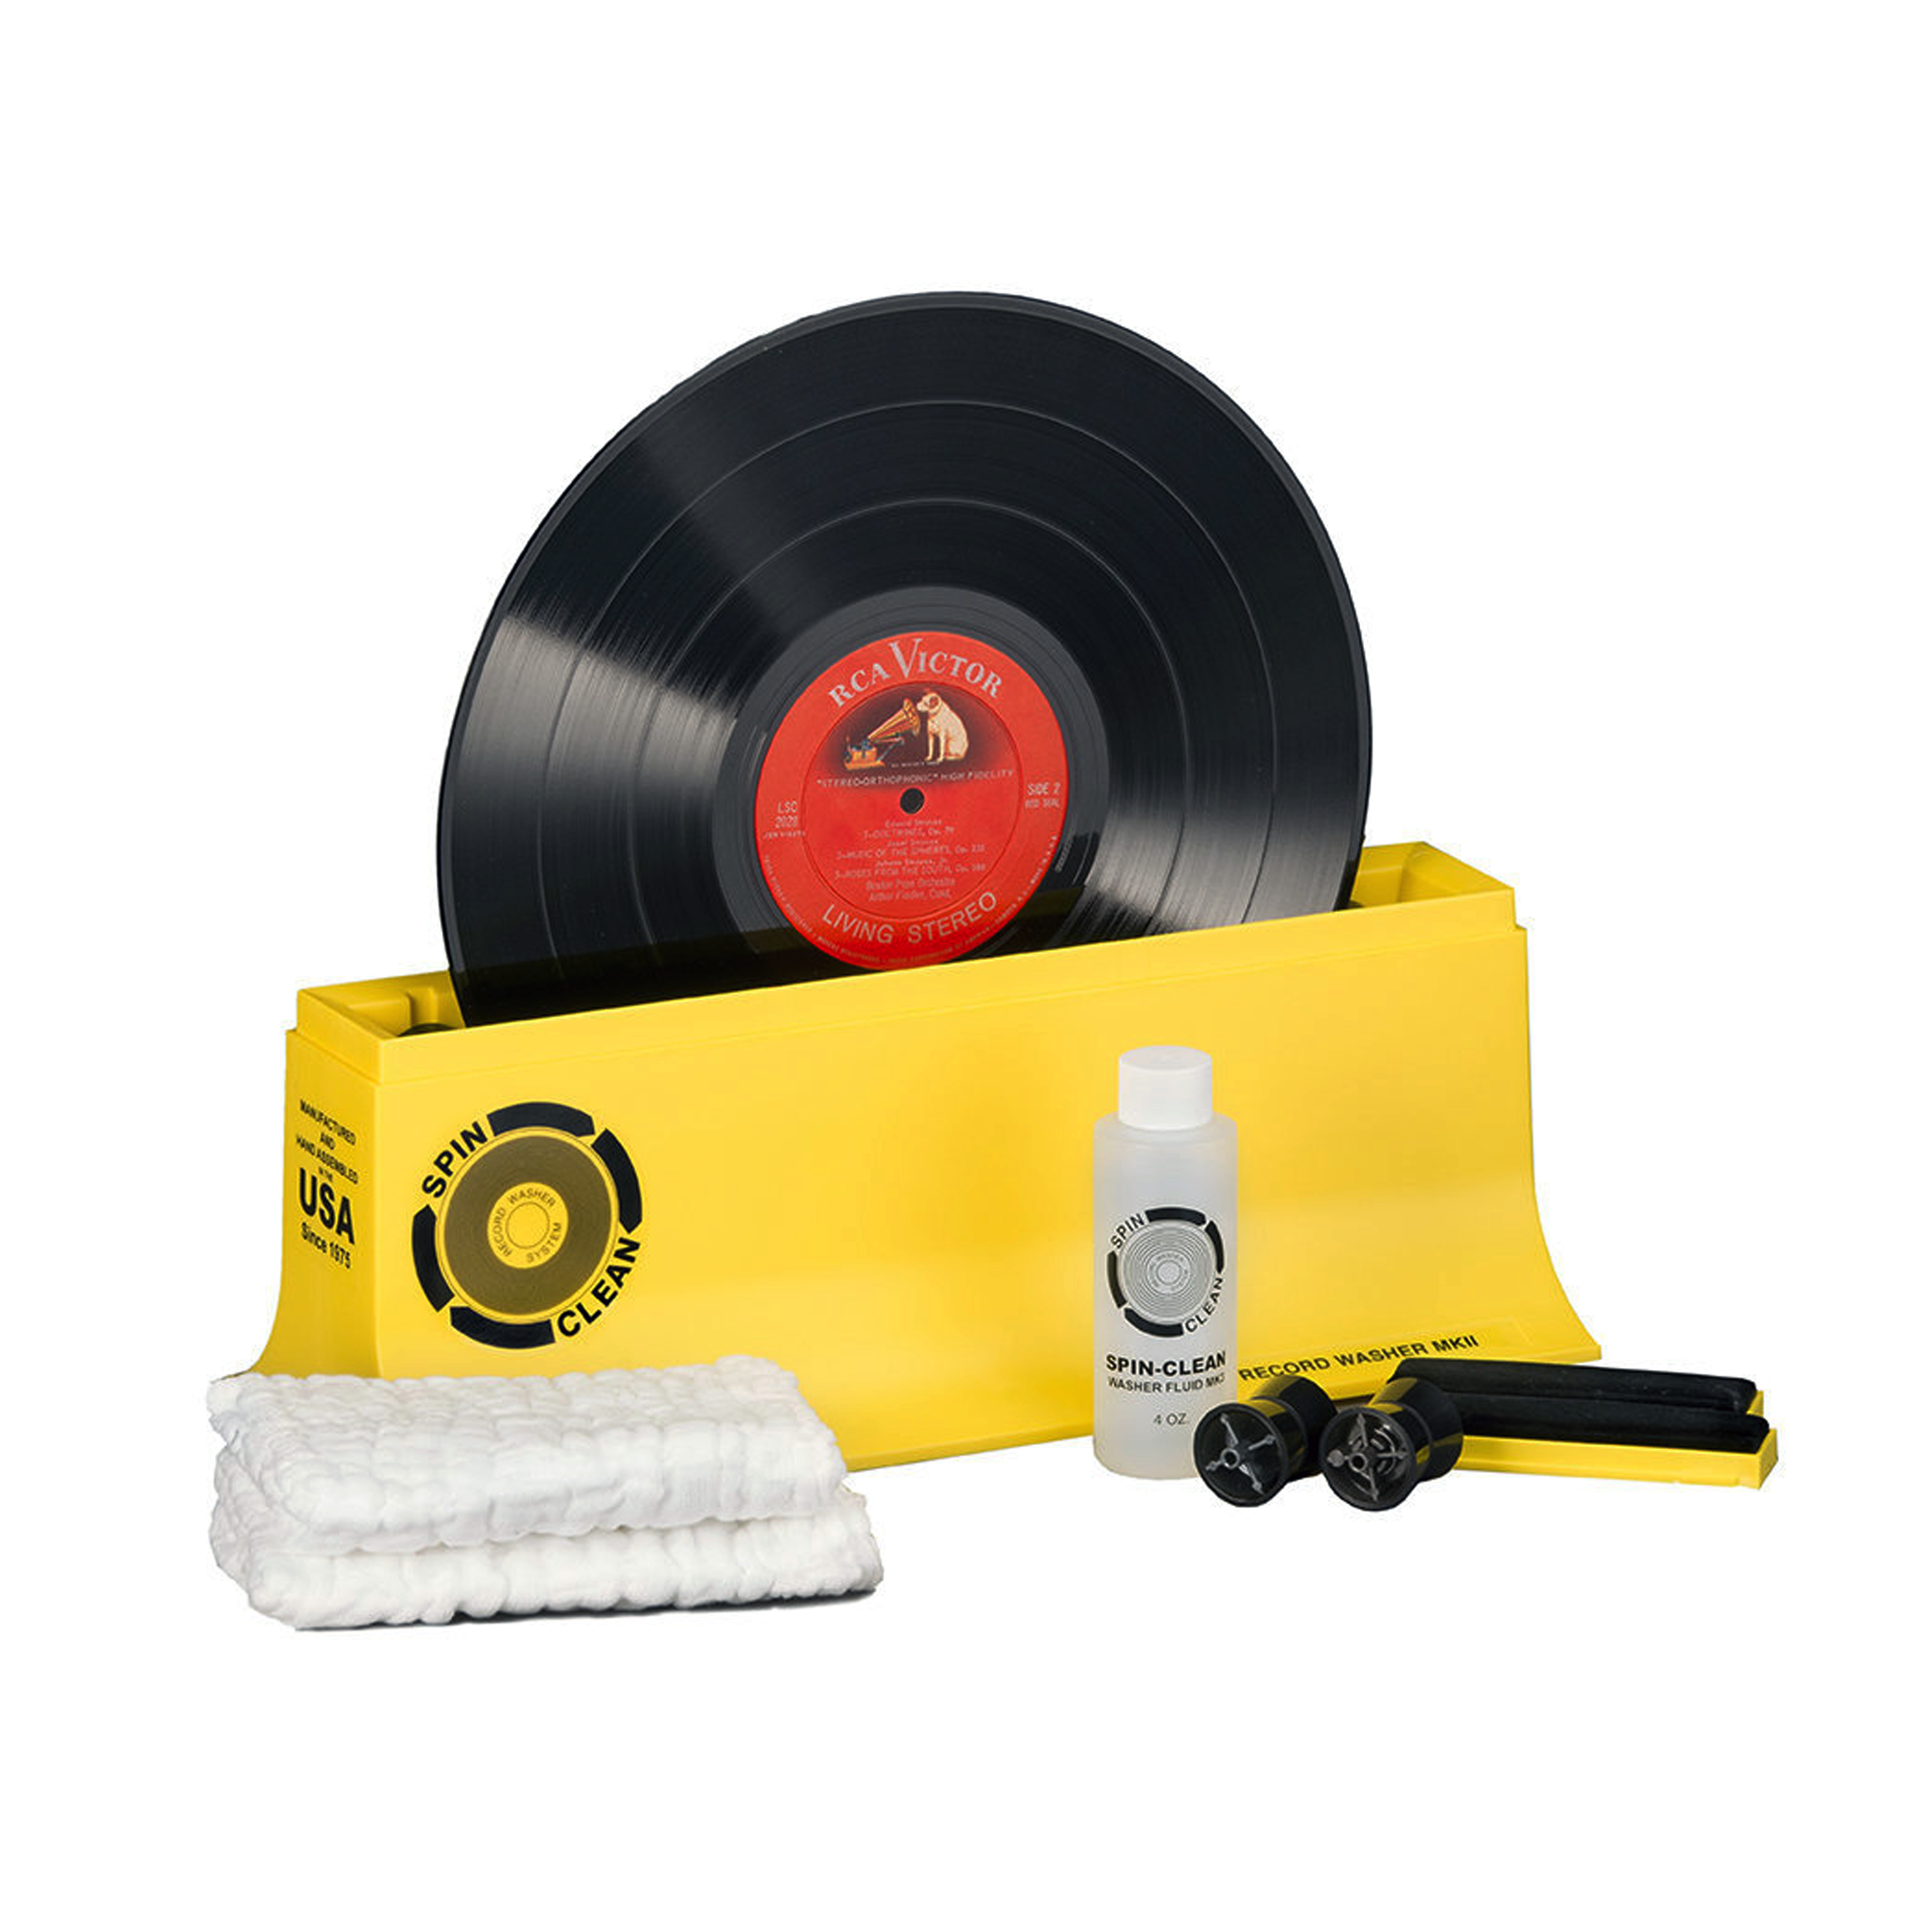 Spin-Clean Record Washer MKII Complete Record Cleaning Kit